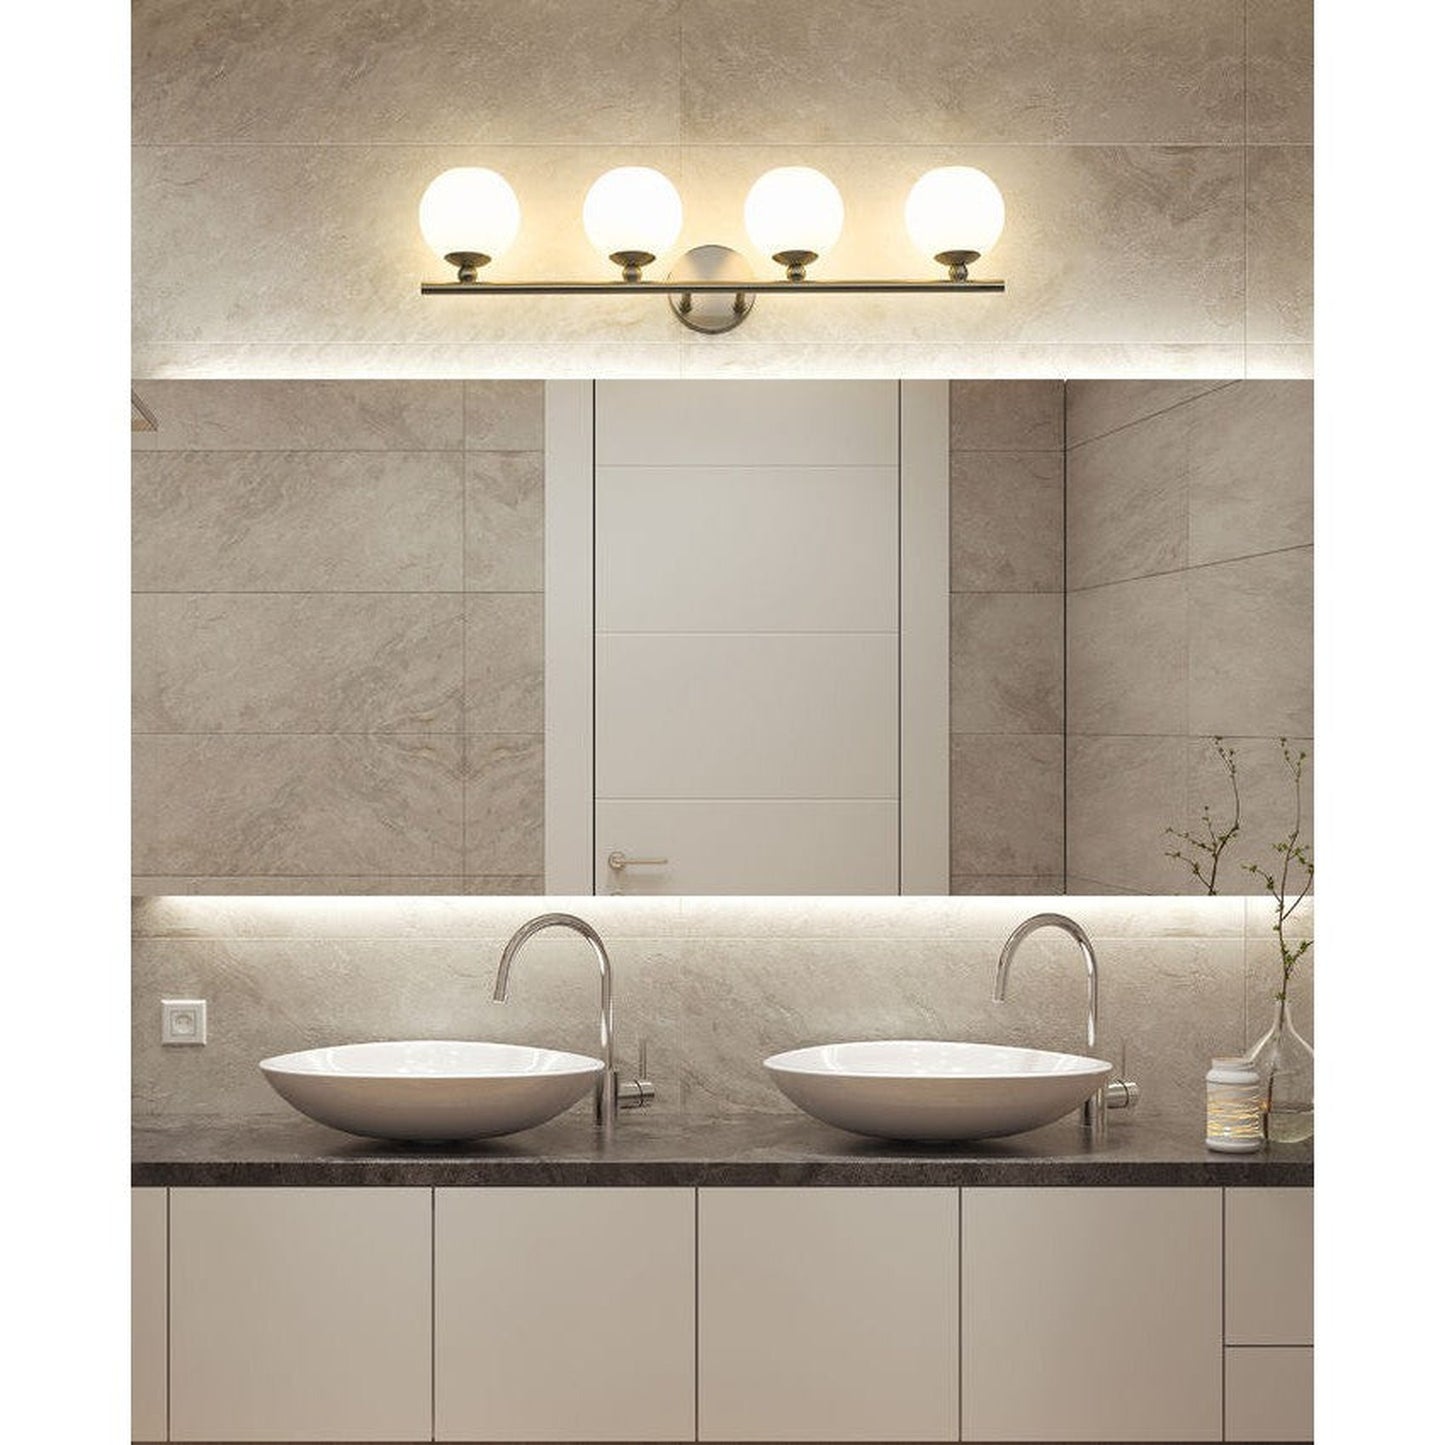 Z-Lite Neoma 30" 4-Light Brushed Nickel and Opal Etched Glass Shade Vanity Light